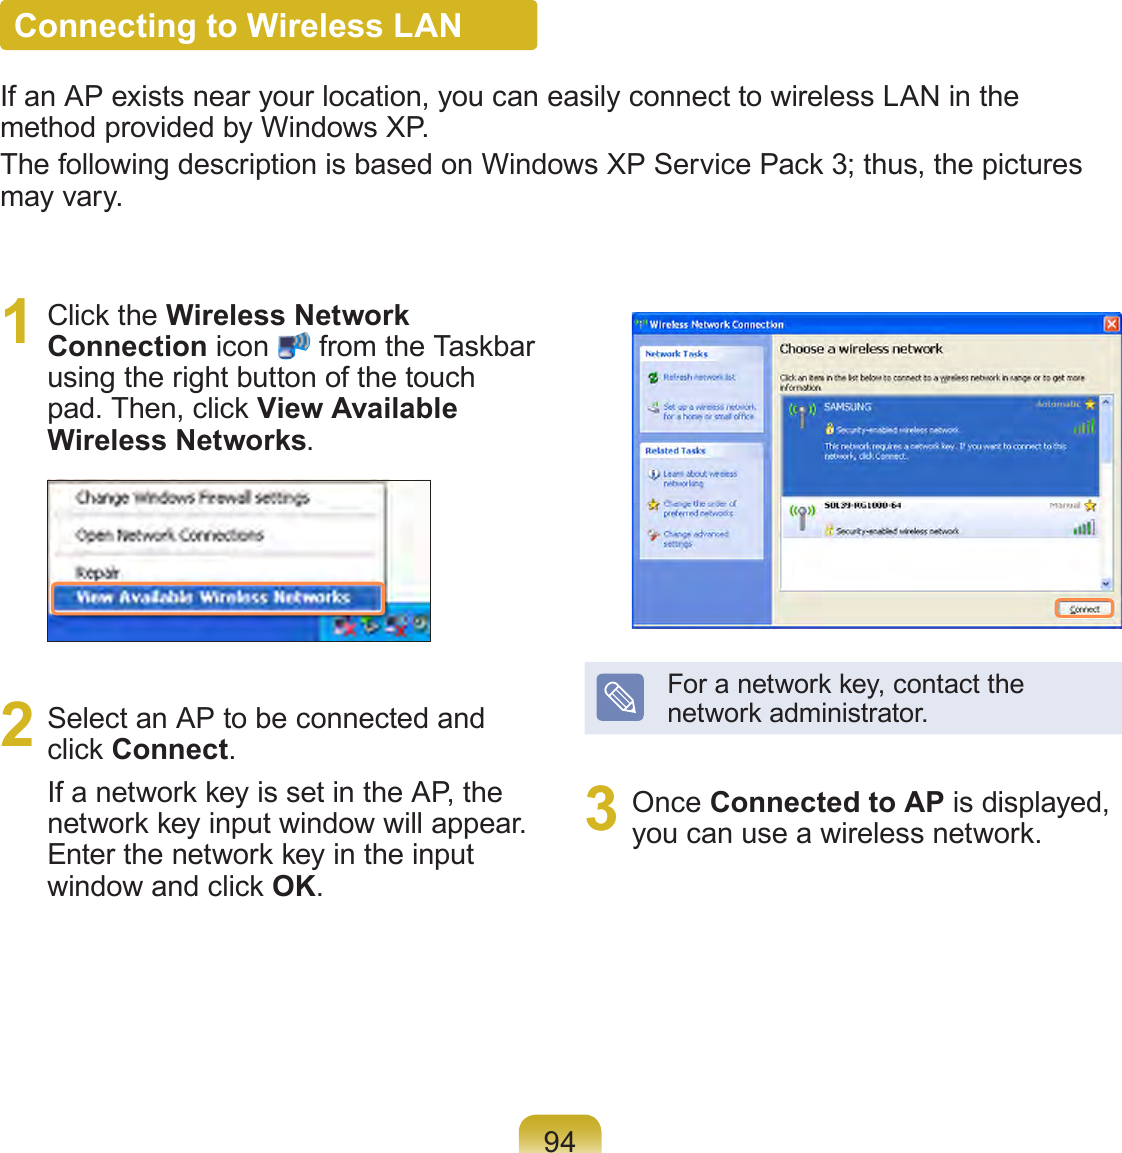 94Connecting to Wireless LANIf an AP exists near your location, you can easily connect to wireless LAN in the method provided by Windows XP.The following description is based on Windows XP Service Pack 3; thus, the pictures may vary.1  Click the Wireless Network Connection icon   from the Taskbar using the right button of the touch pad. Then, click View Available Wireless Networks.2  Select an AP to be connected and click Connect.If a network key is set in the AP, the network key input window will appear. Enter the network key in the input window and click OK.For a network key, contact the network administrator.3  Once Connected to AP is displayed, you can use a wireless network.